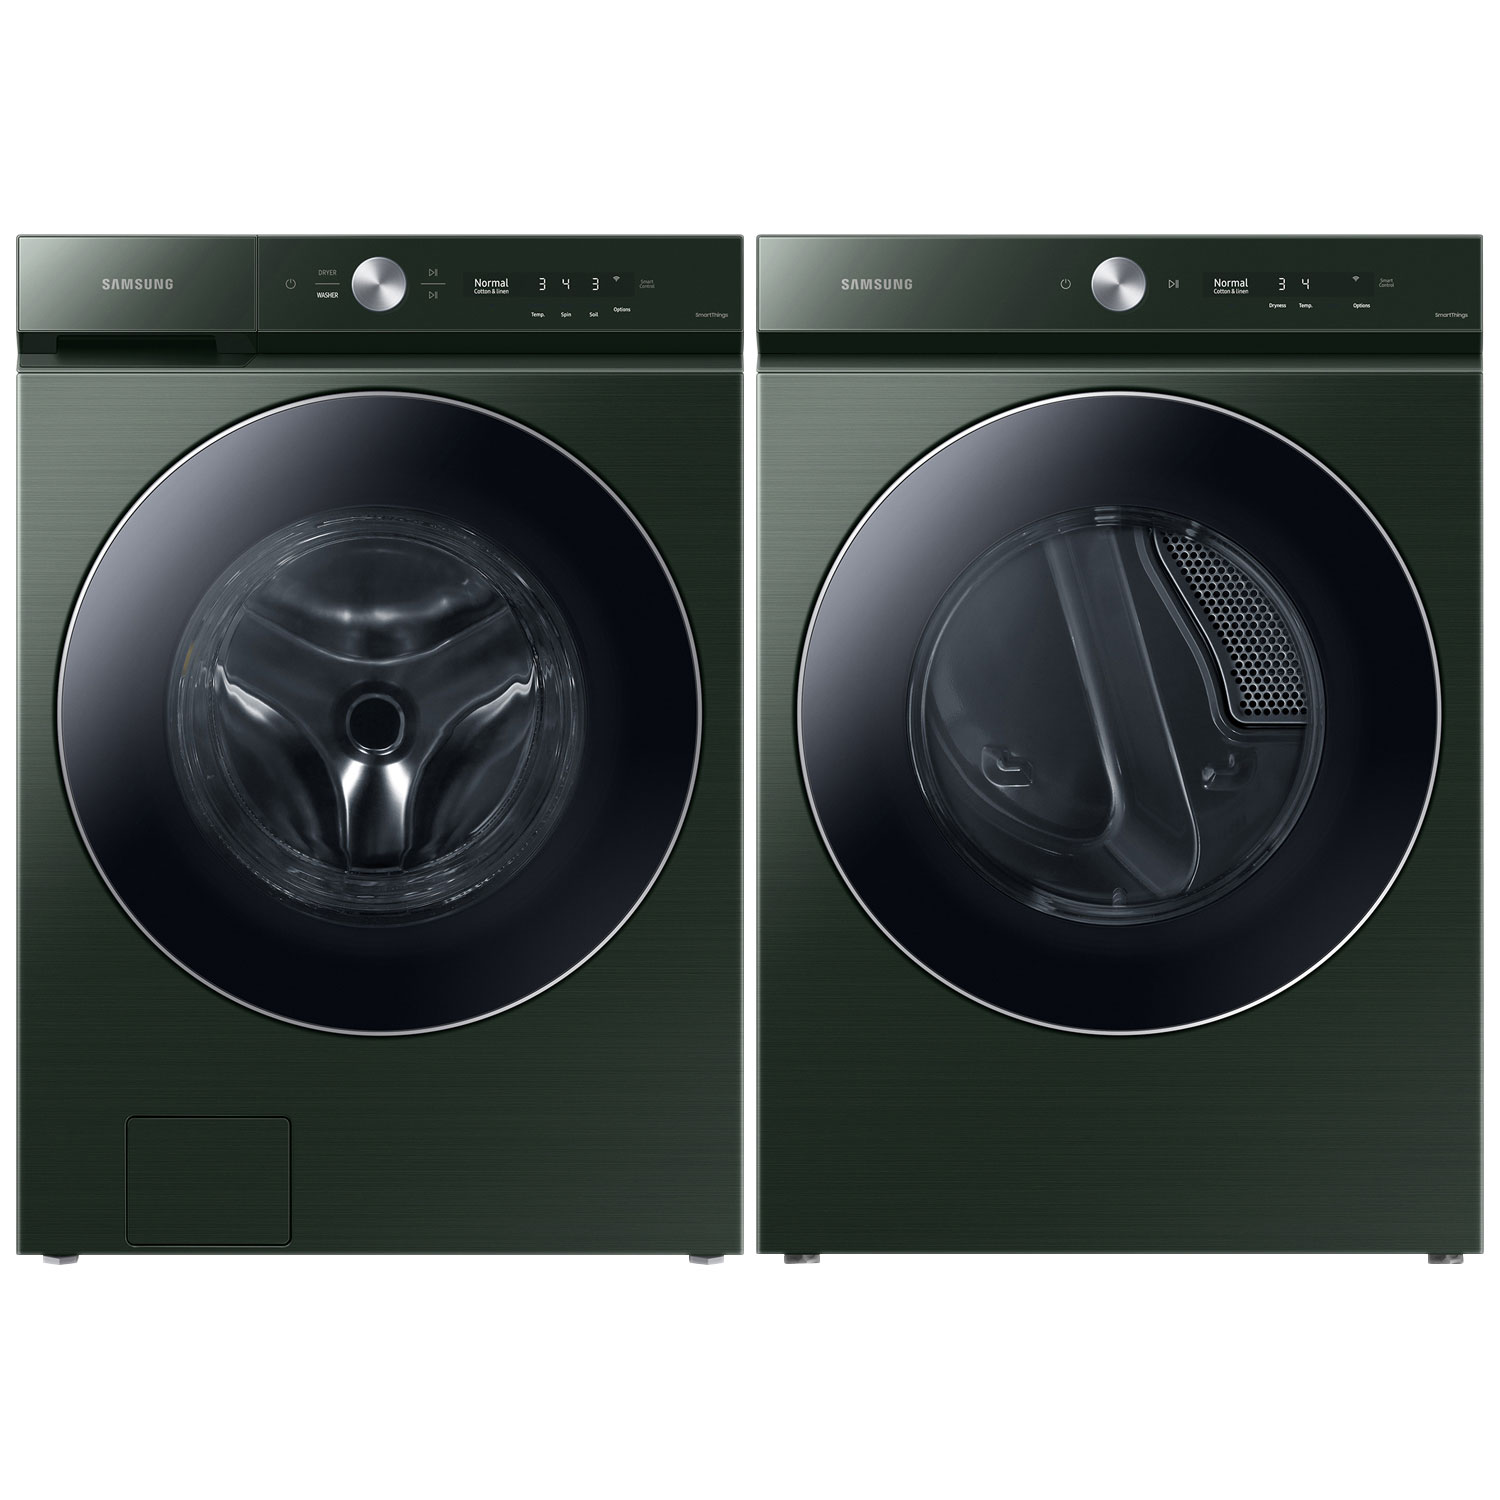 Samsung 6.1 Cu. Ft. High Efficiency Front Load Washer & 7.6 Cu. Ft. Electric Dryer - Emerald Green